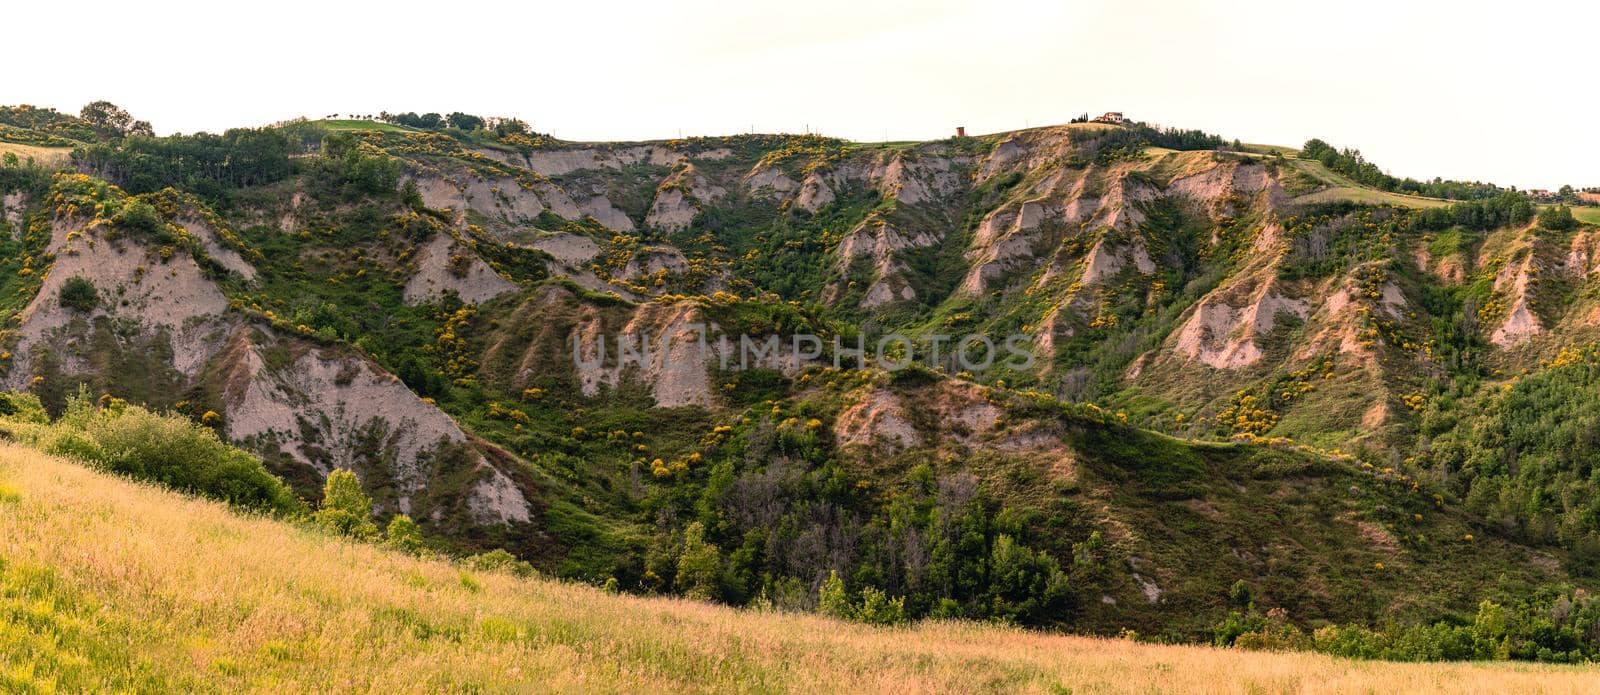 Eroded hills in Montespino, near Pesaro and Urbino in Italy, at evening before the sunset